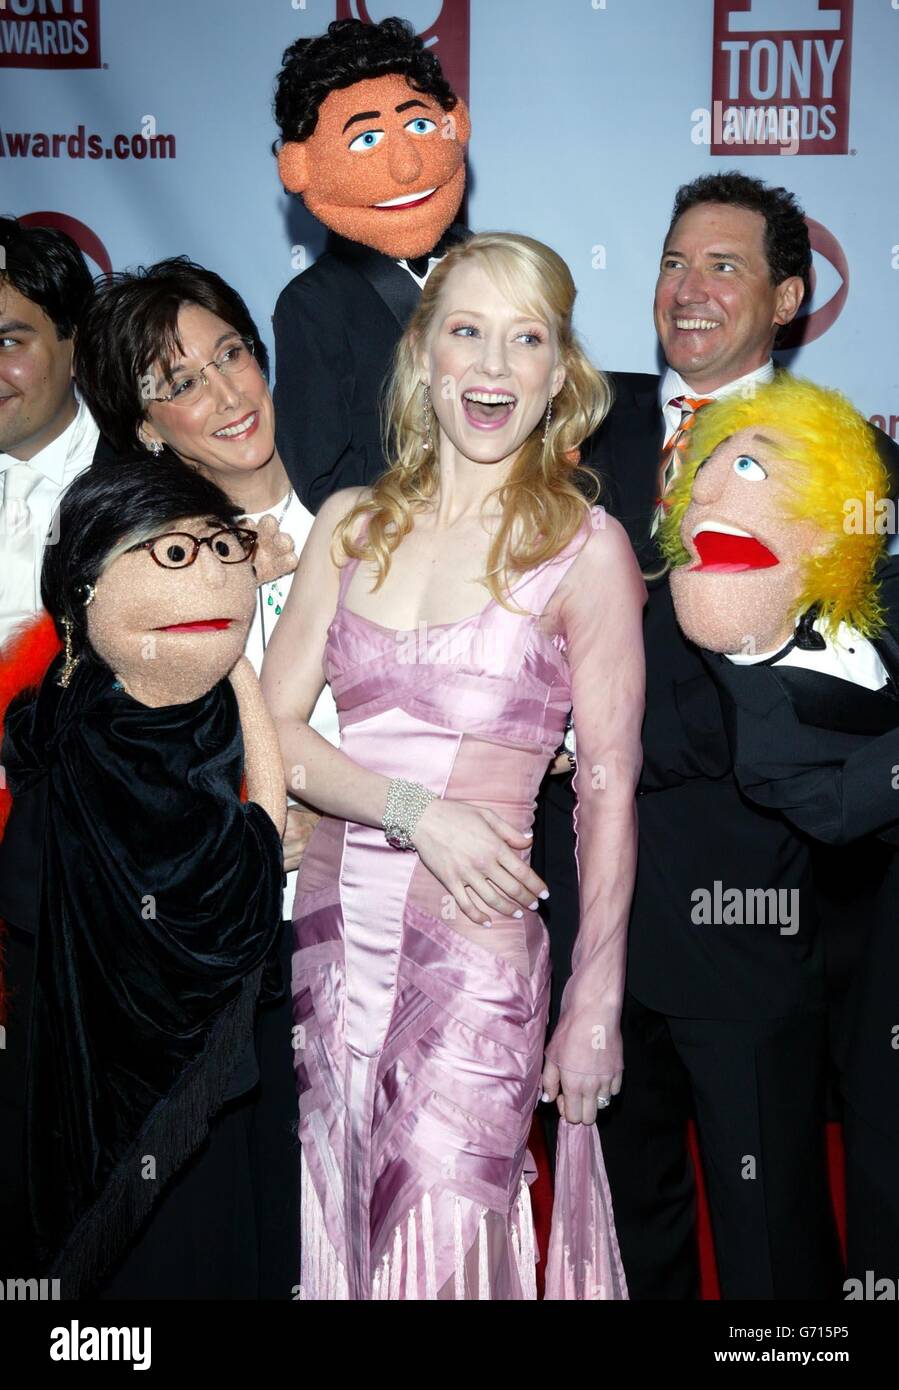 Actress Anne Heche and the cast of Avenue Q arrive for the 2004 Tony Awards at Radio City Music Hall in New York City. Stock Photo